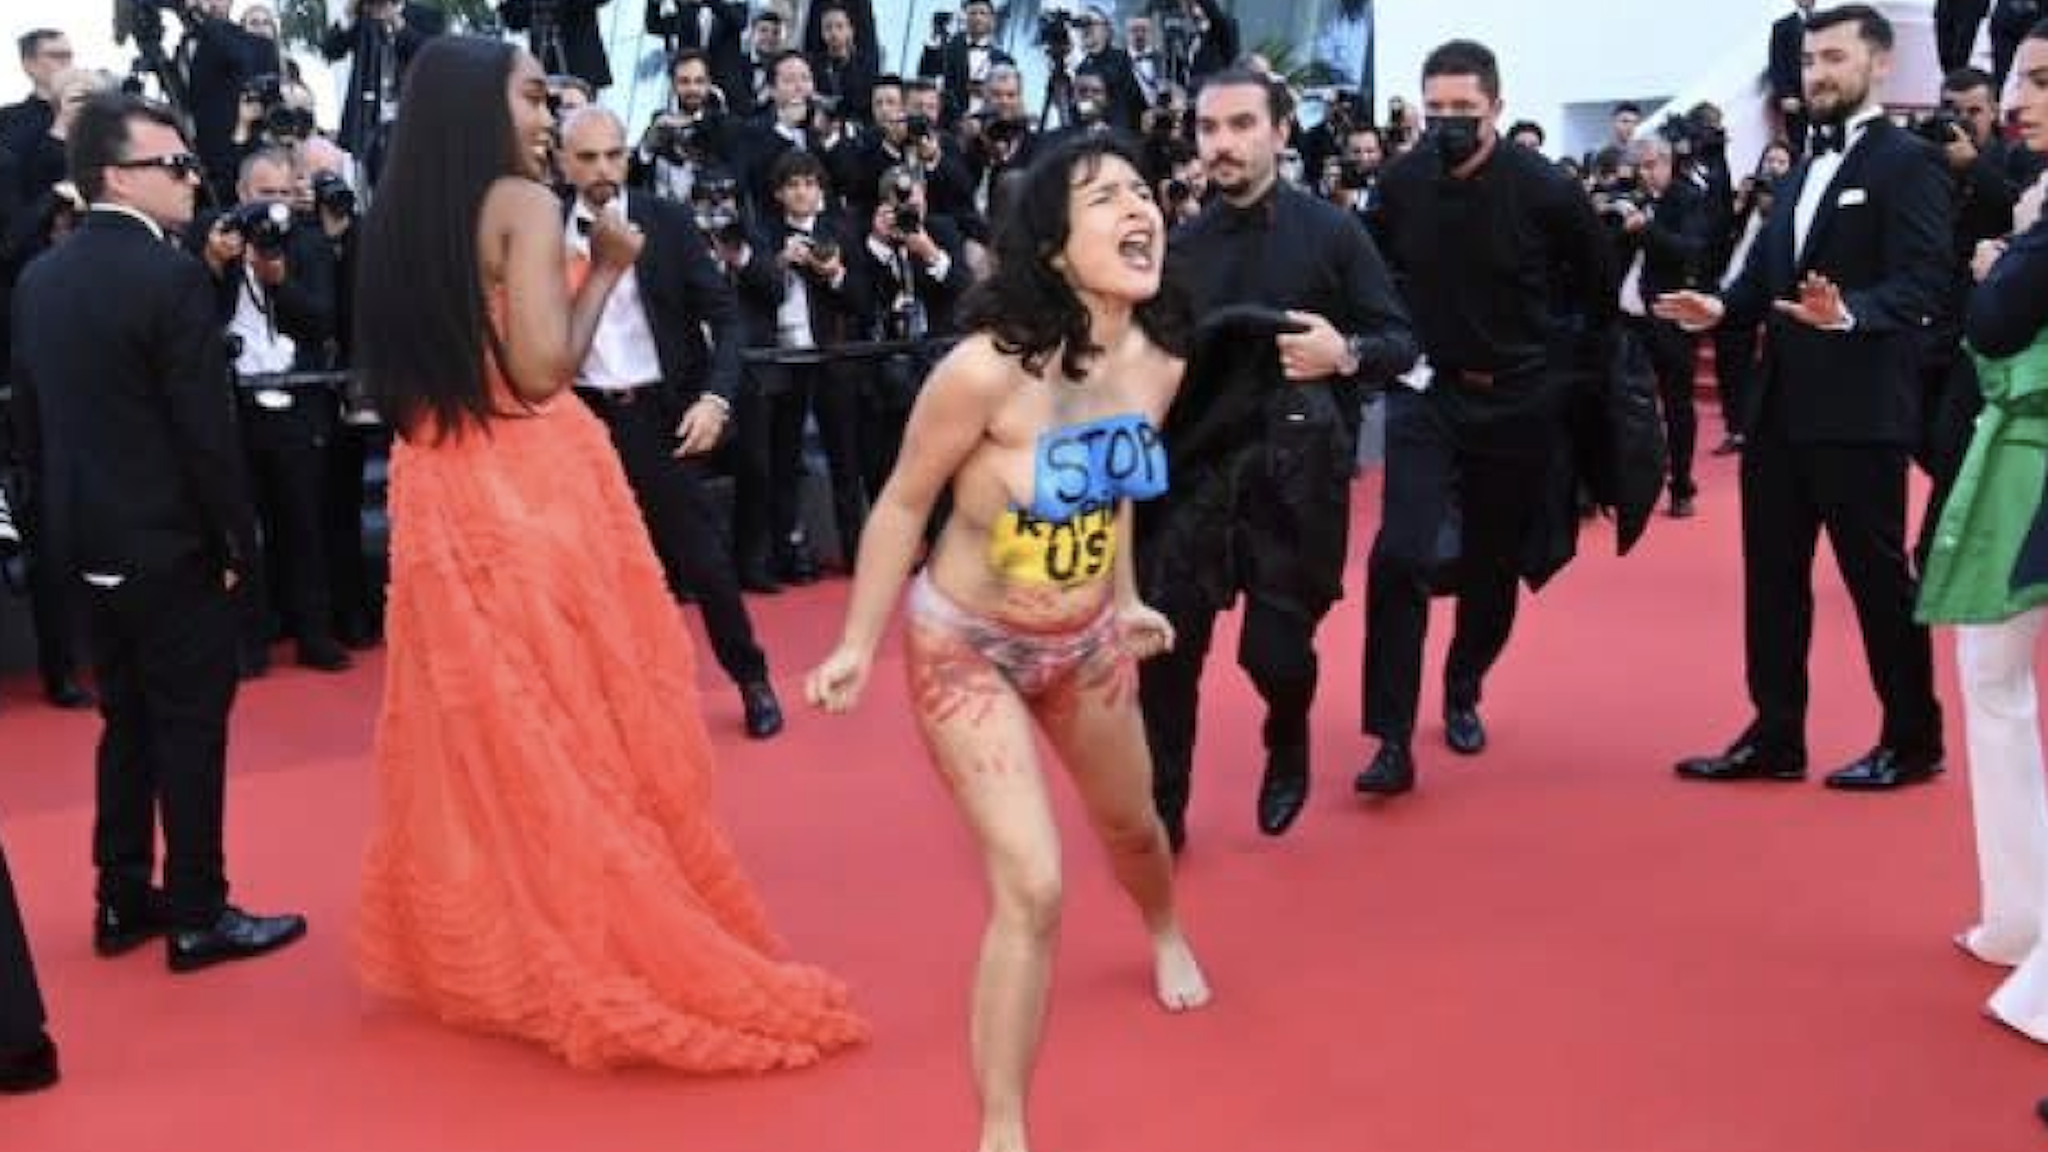 A topless protester yelling "Don't rape us" interrupted a red carpet at Cannes